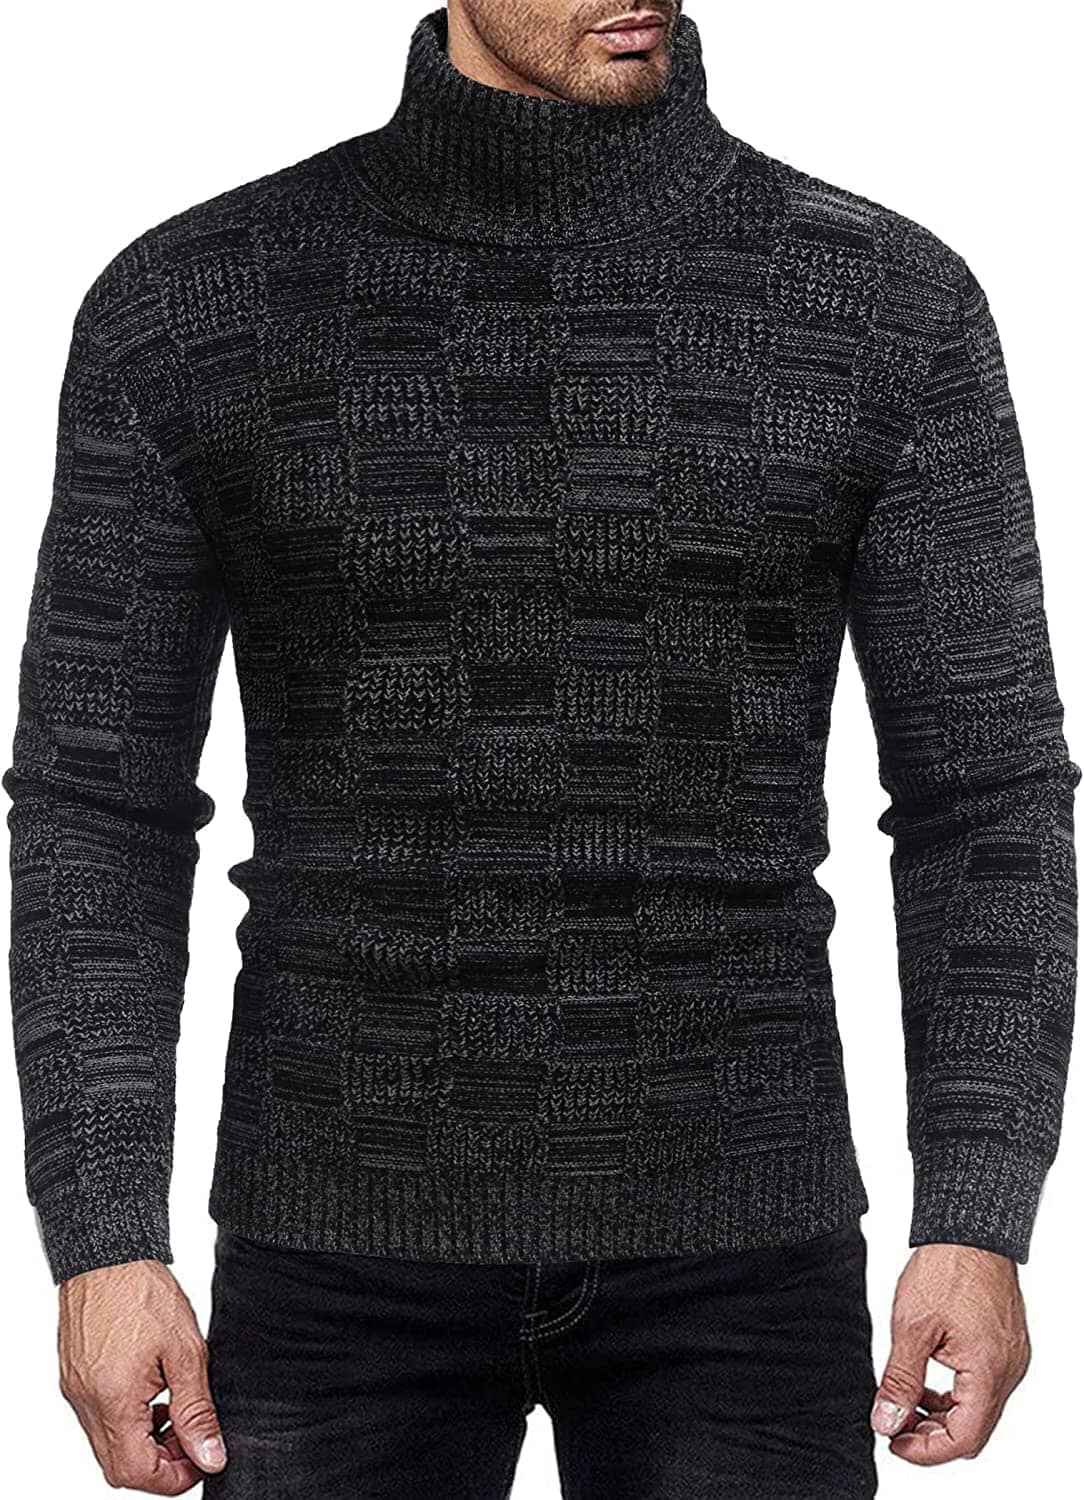 Men's Knitted Turtleneck Sweater Plaid Hightneck Long Sleeve Sweater (US Only) Sweaters COOFANDY Store Black S 